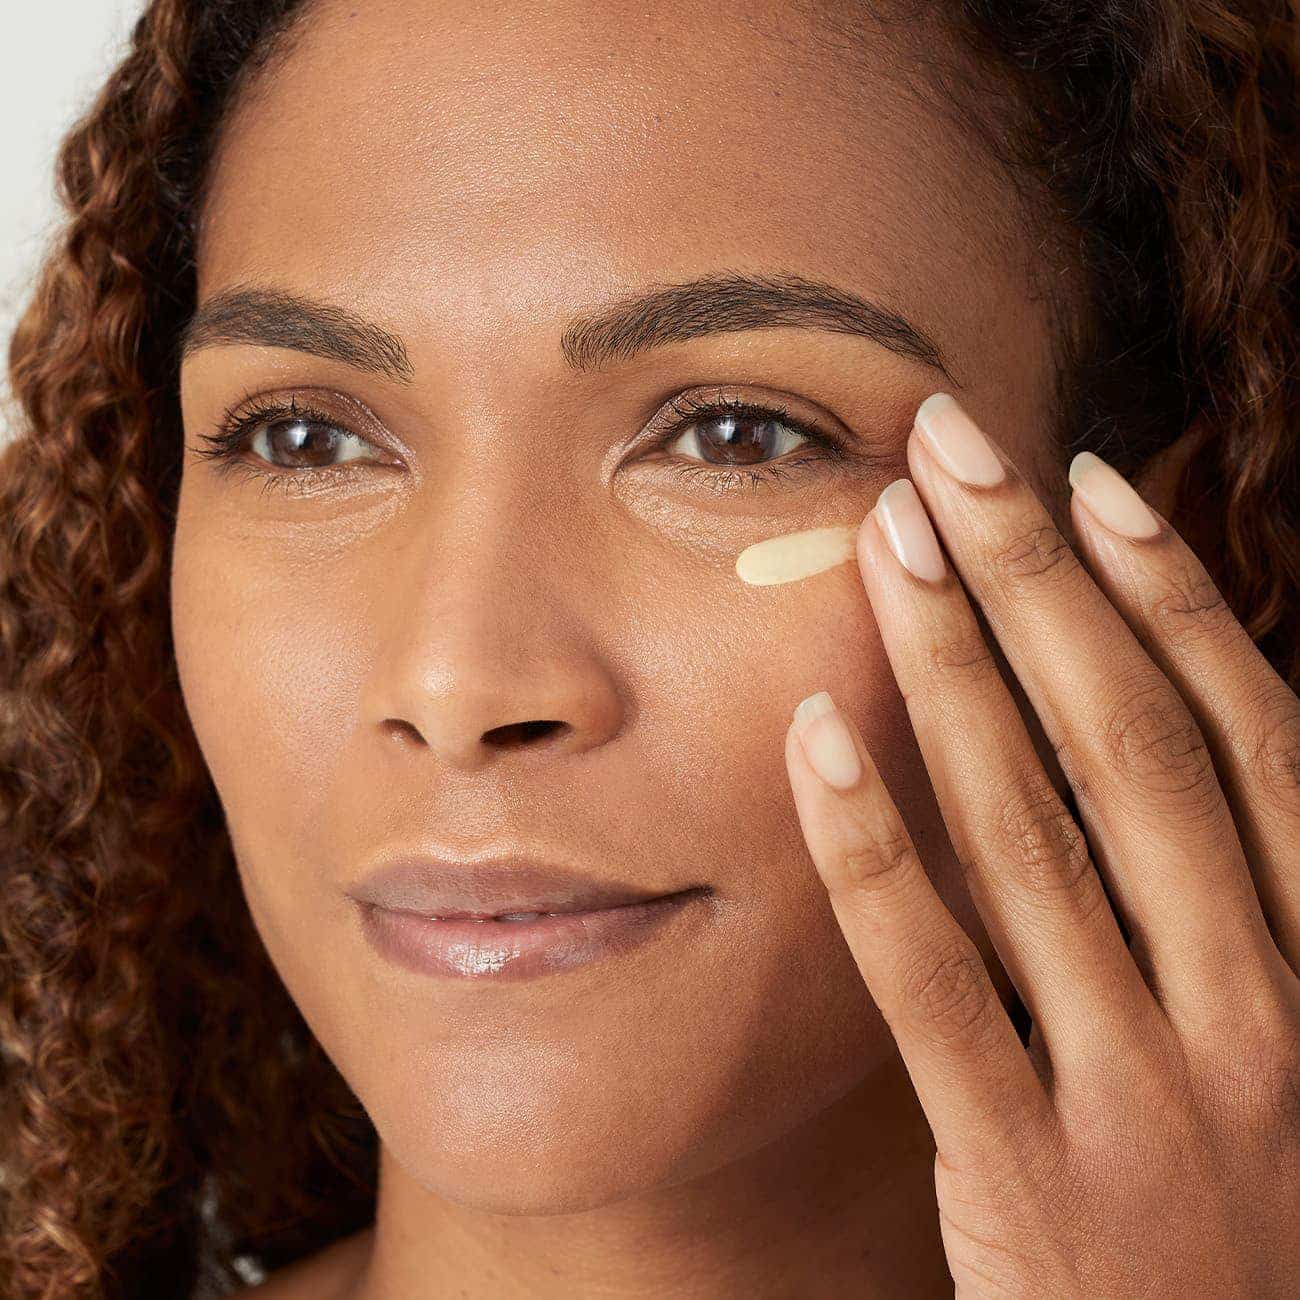 How Do Eye Creams Work? And Do You Need To Use Them?